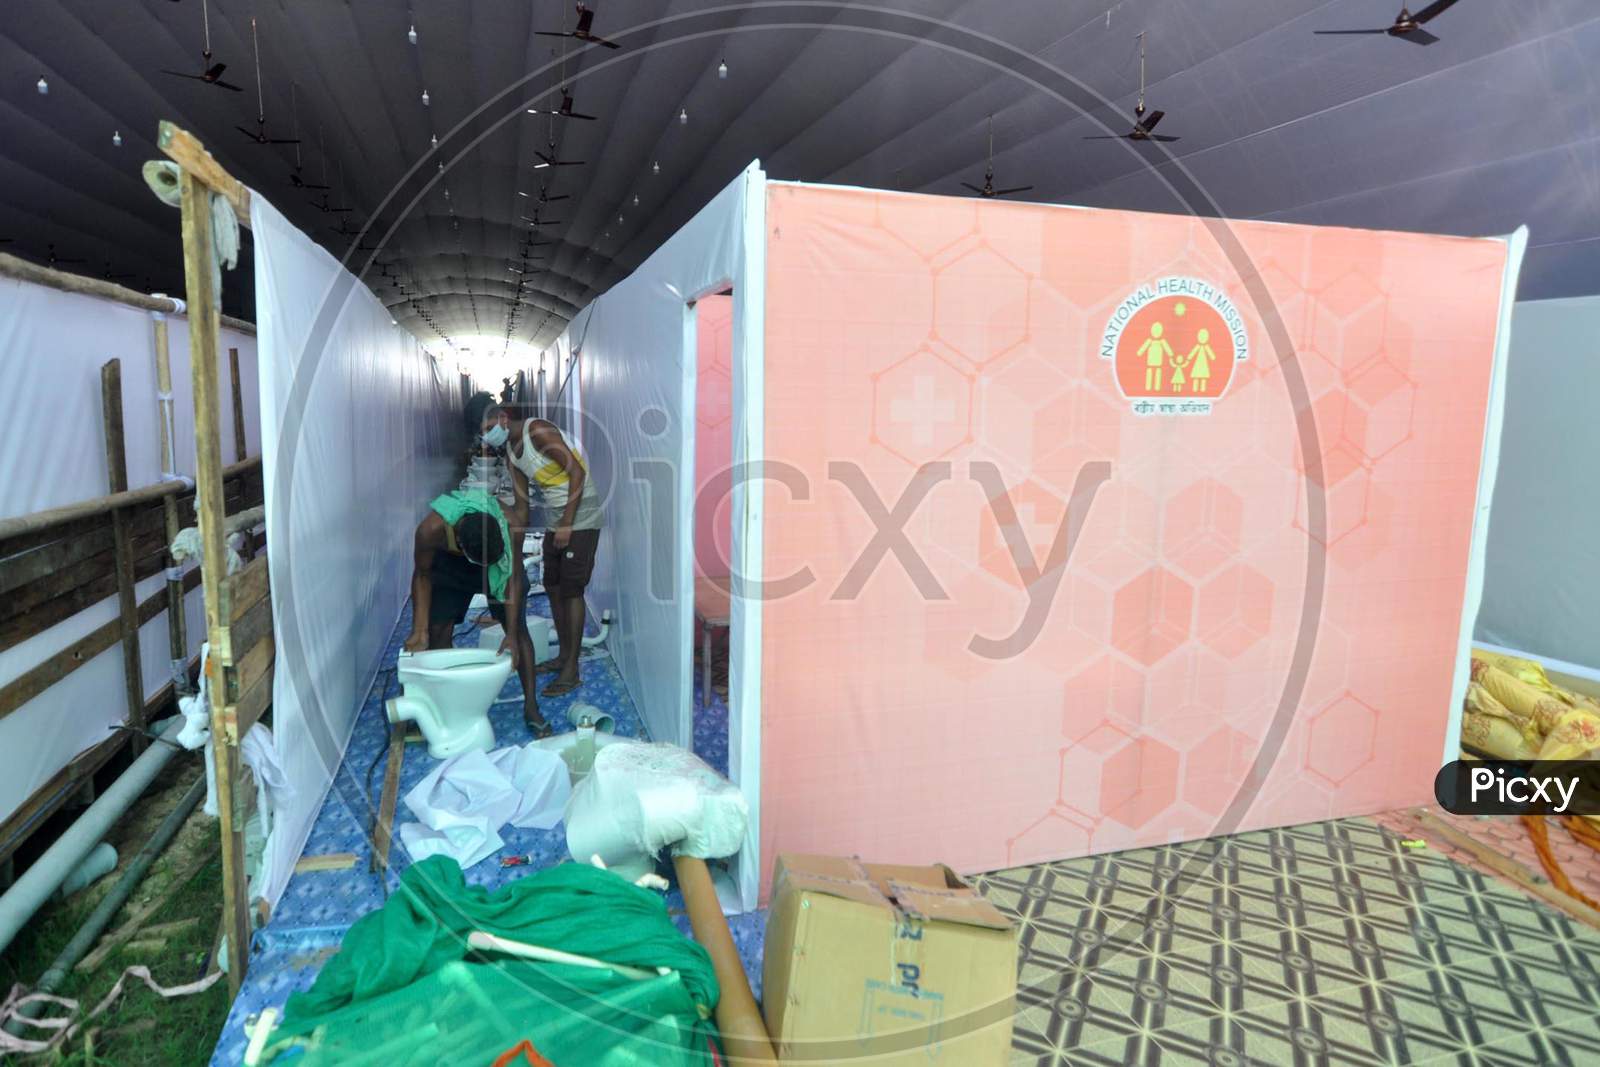 Workers Set Up A Temporary Covid-19 Care Center At Nehru Stadium In Guwahati On August 6, 2020.